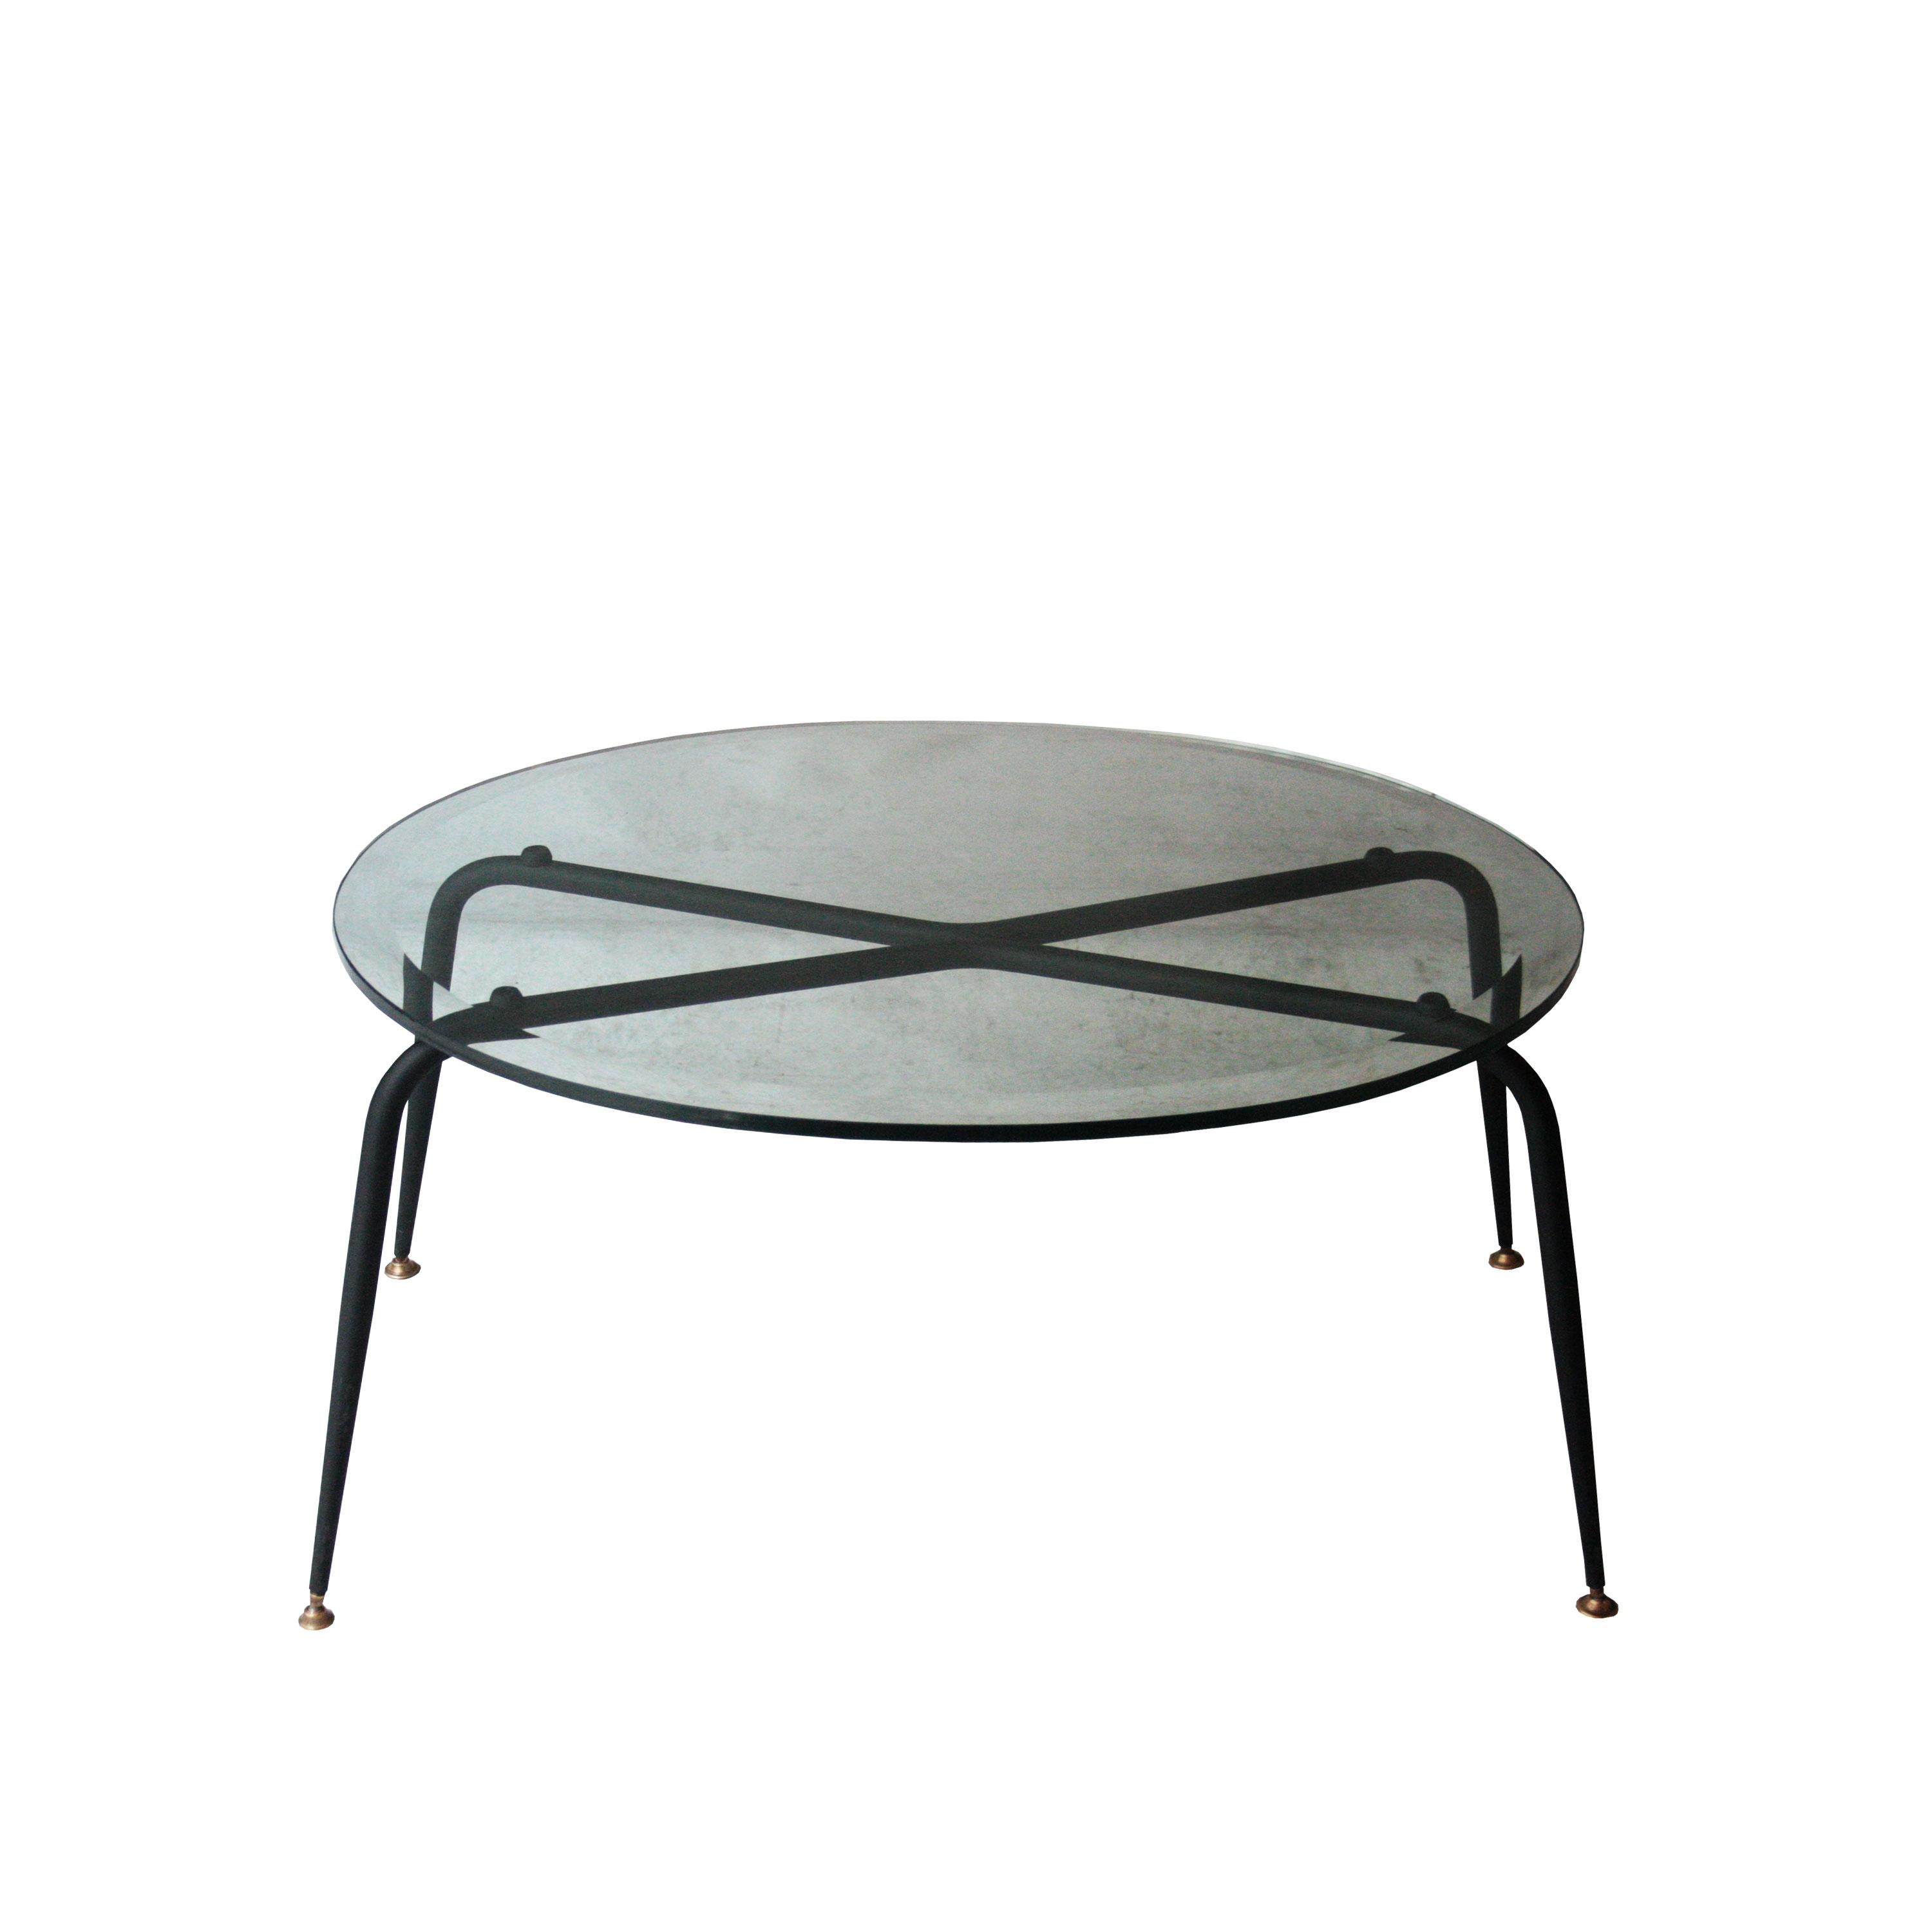 Italian Mid-Century Modern Oval Black Glass Brass French Center Table, 1950 For Sale